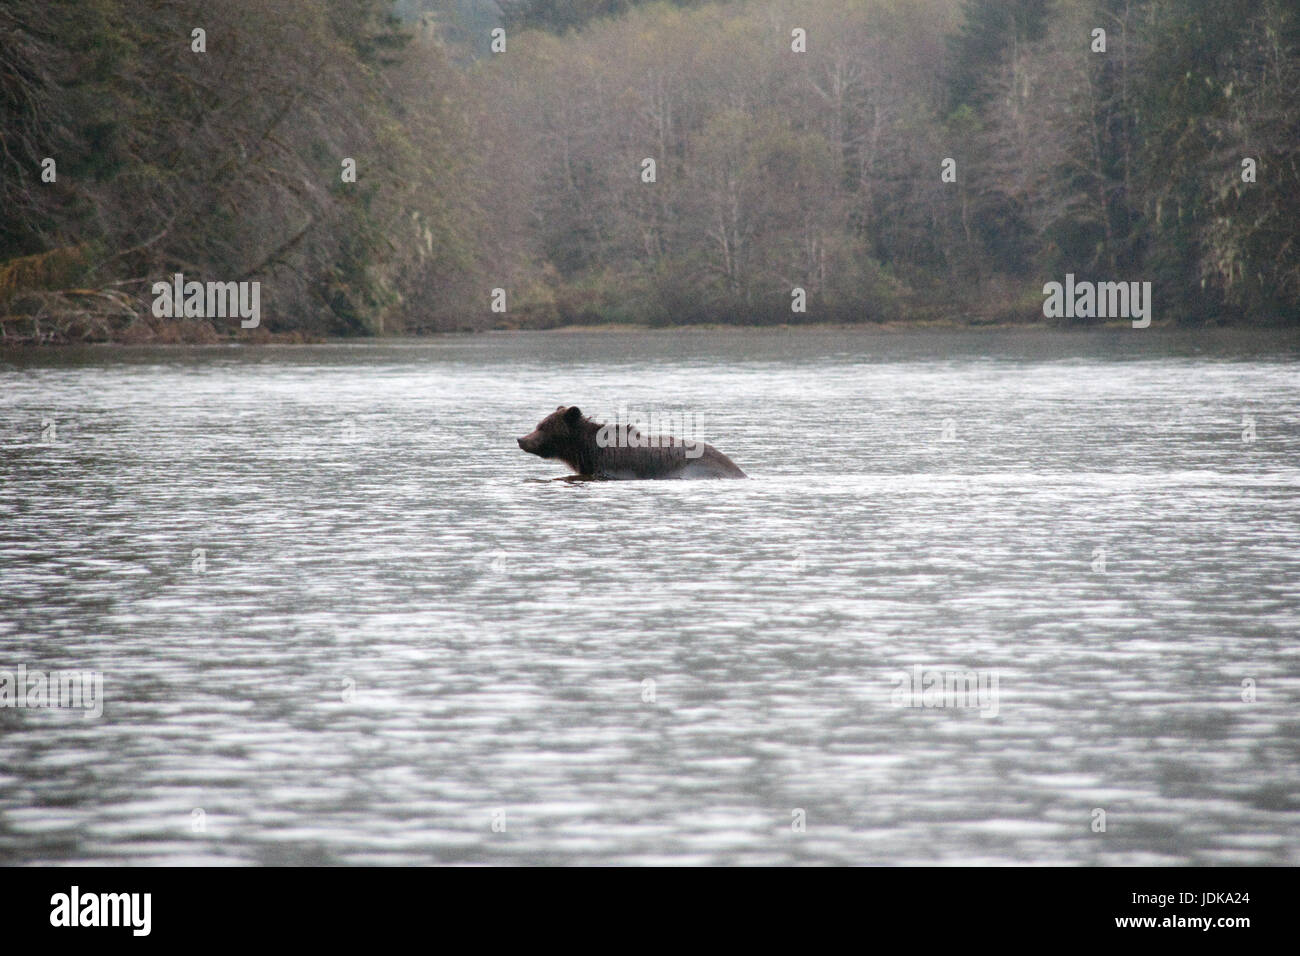 An adult male grizzly bear swims across a river in the Great Bear Rainforest region of British Columbia, Canada. Stock Photo